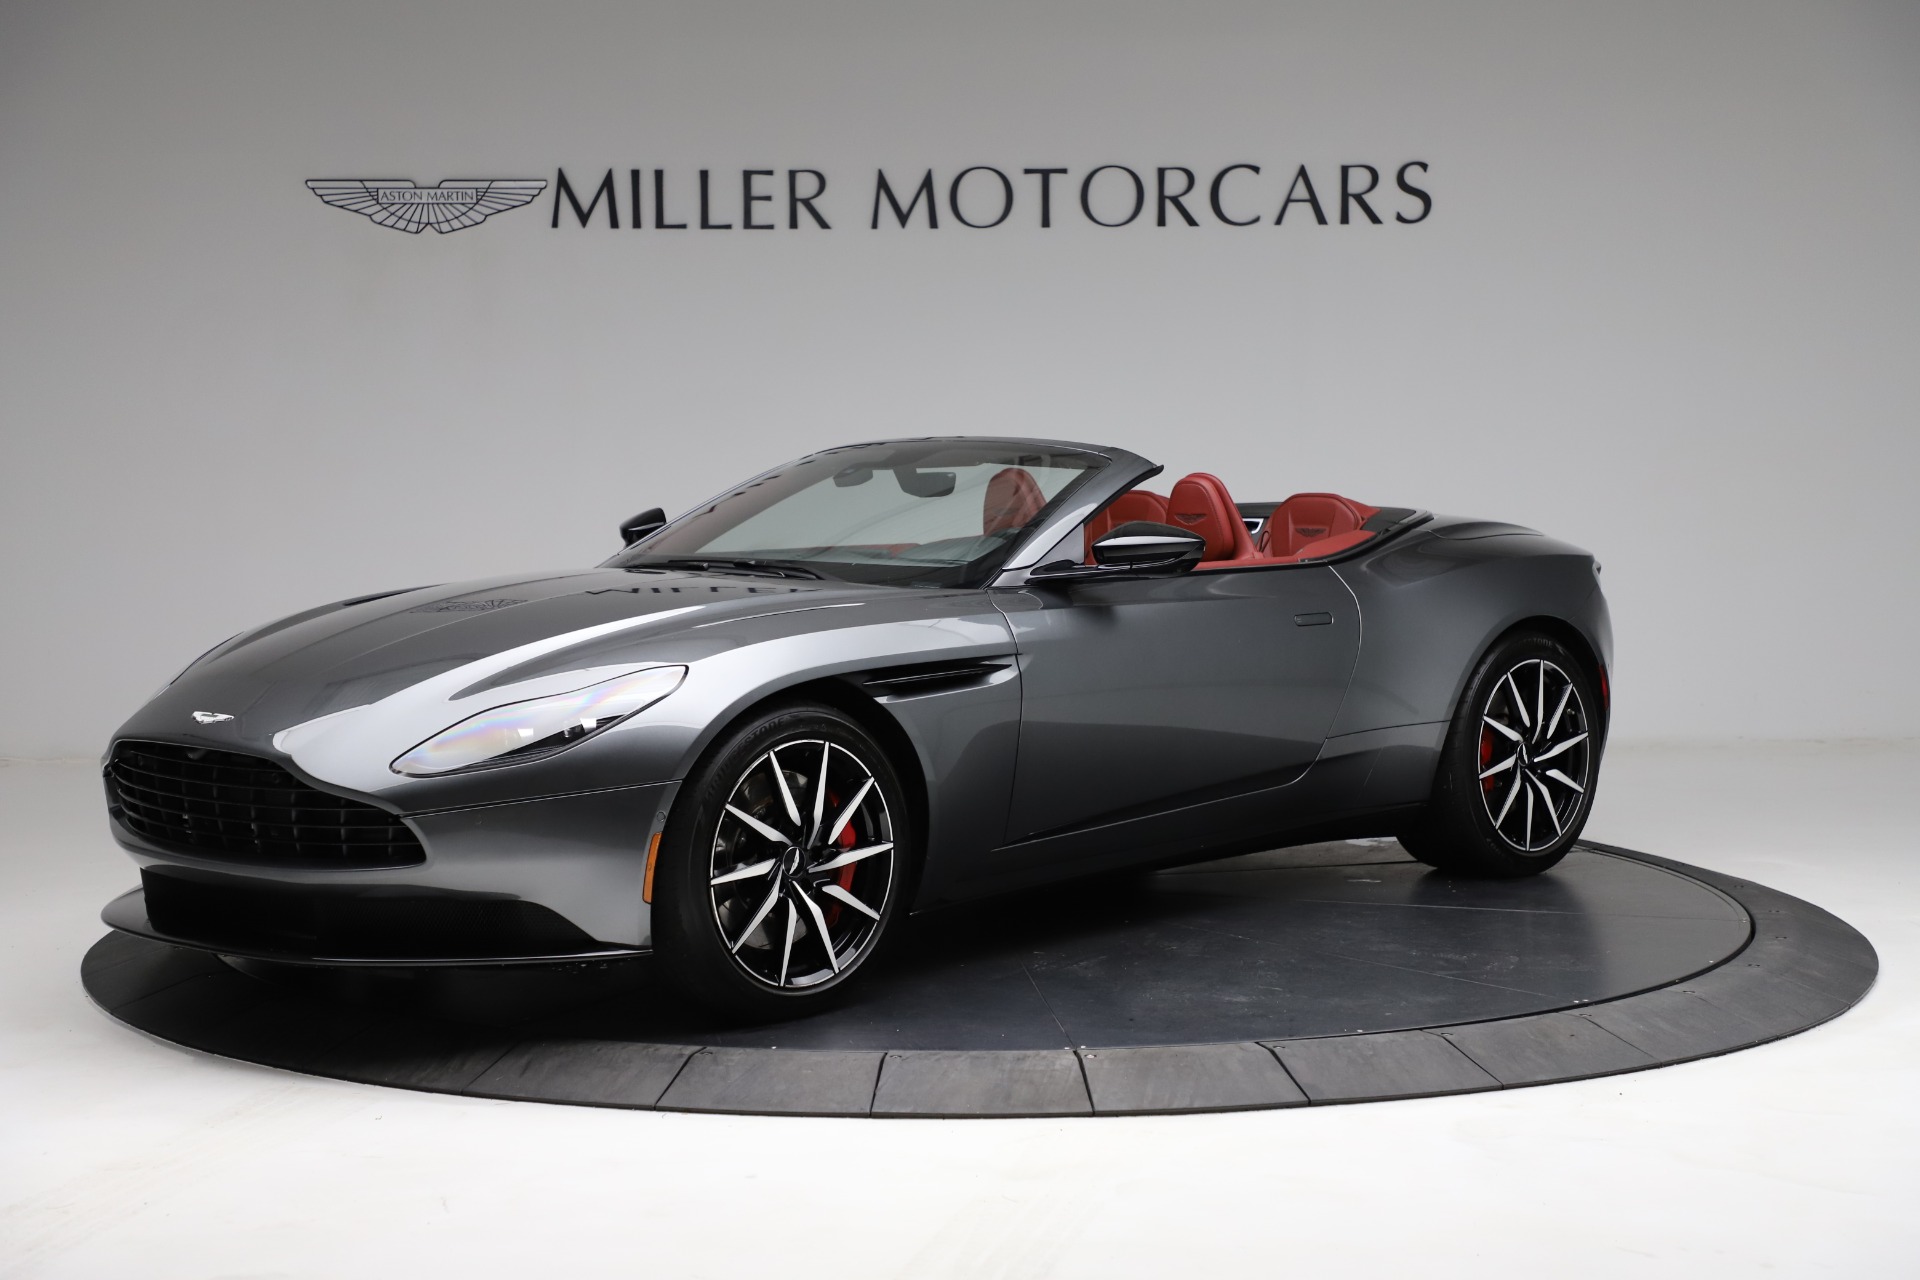 Used 2019 Aston Martin DB11 Volante for sale Sold at Alfa Romeo of Westport in Westport CT 06880 1